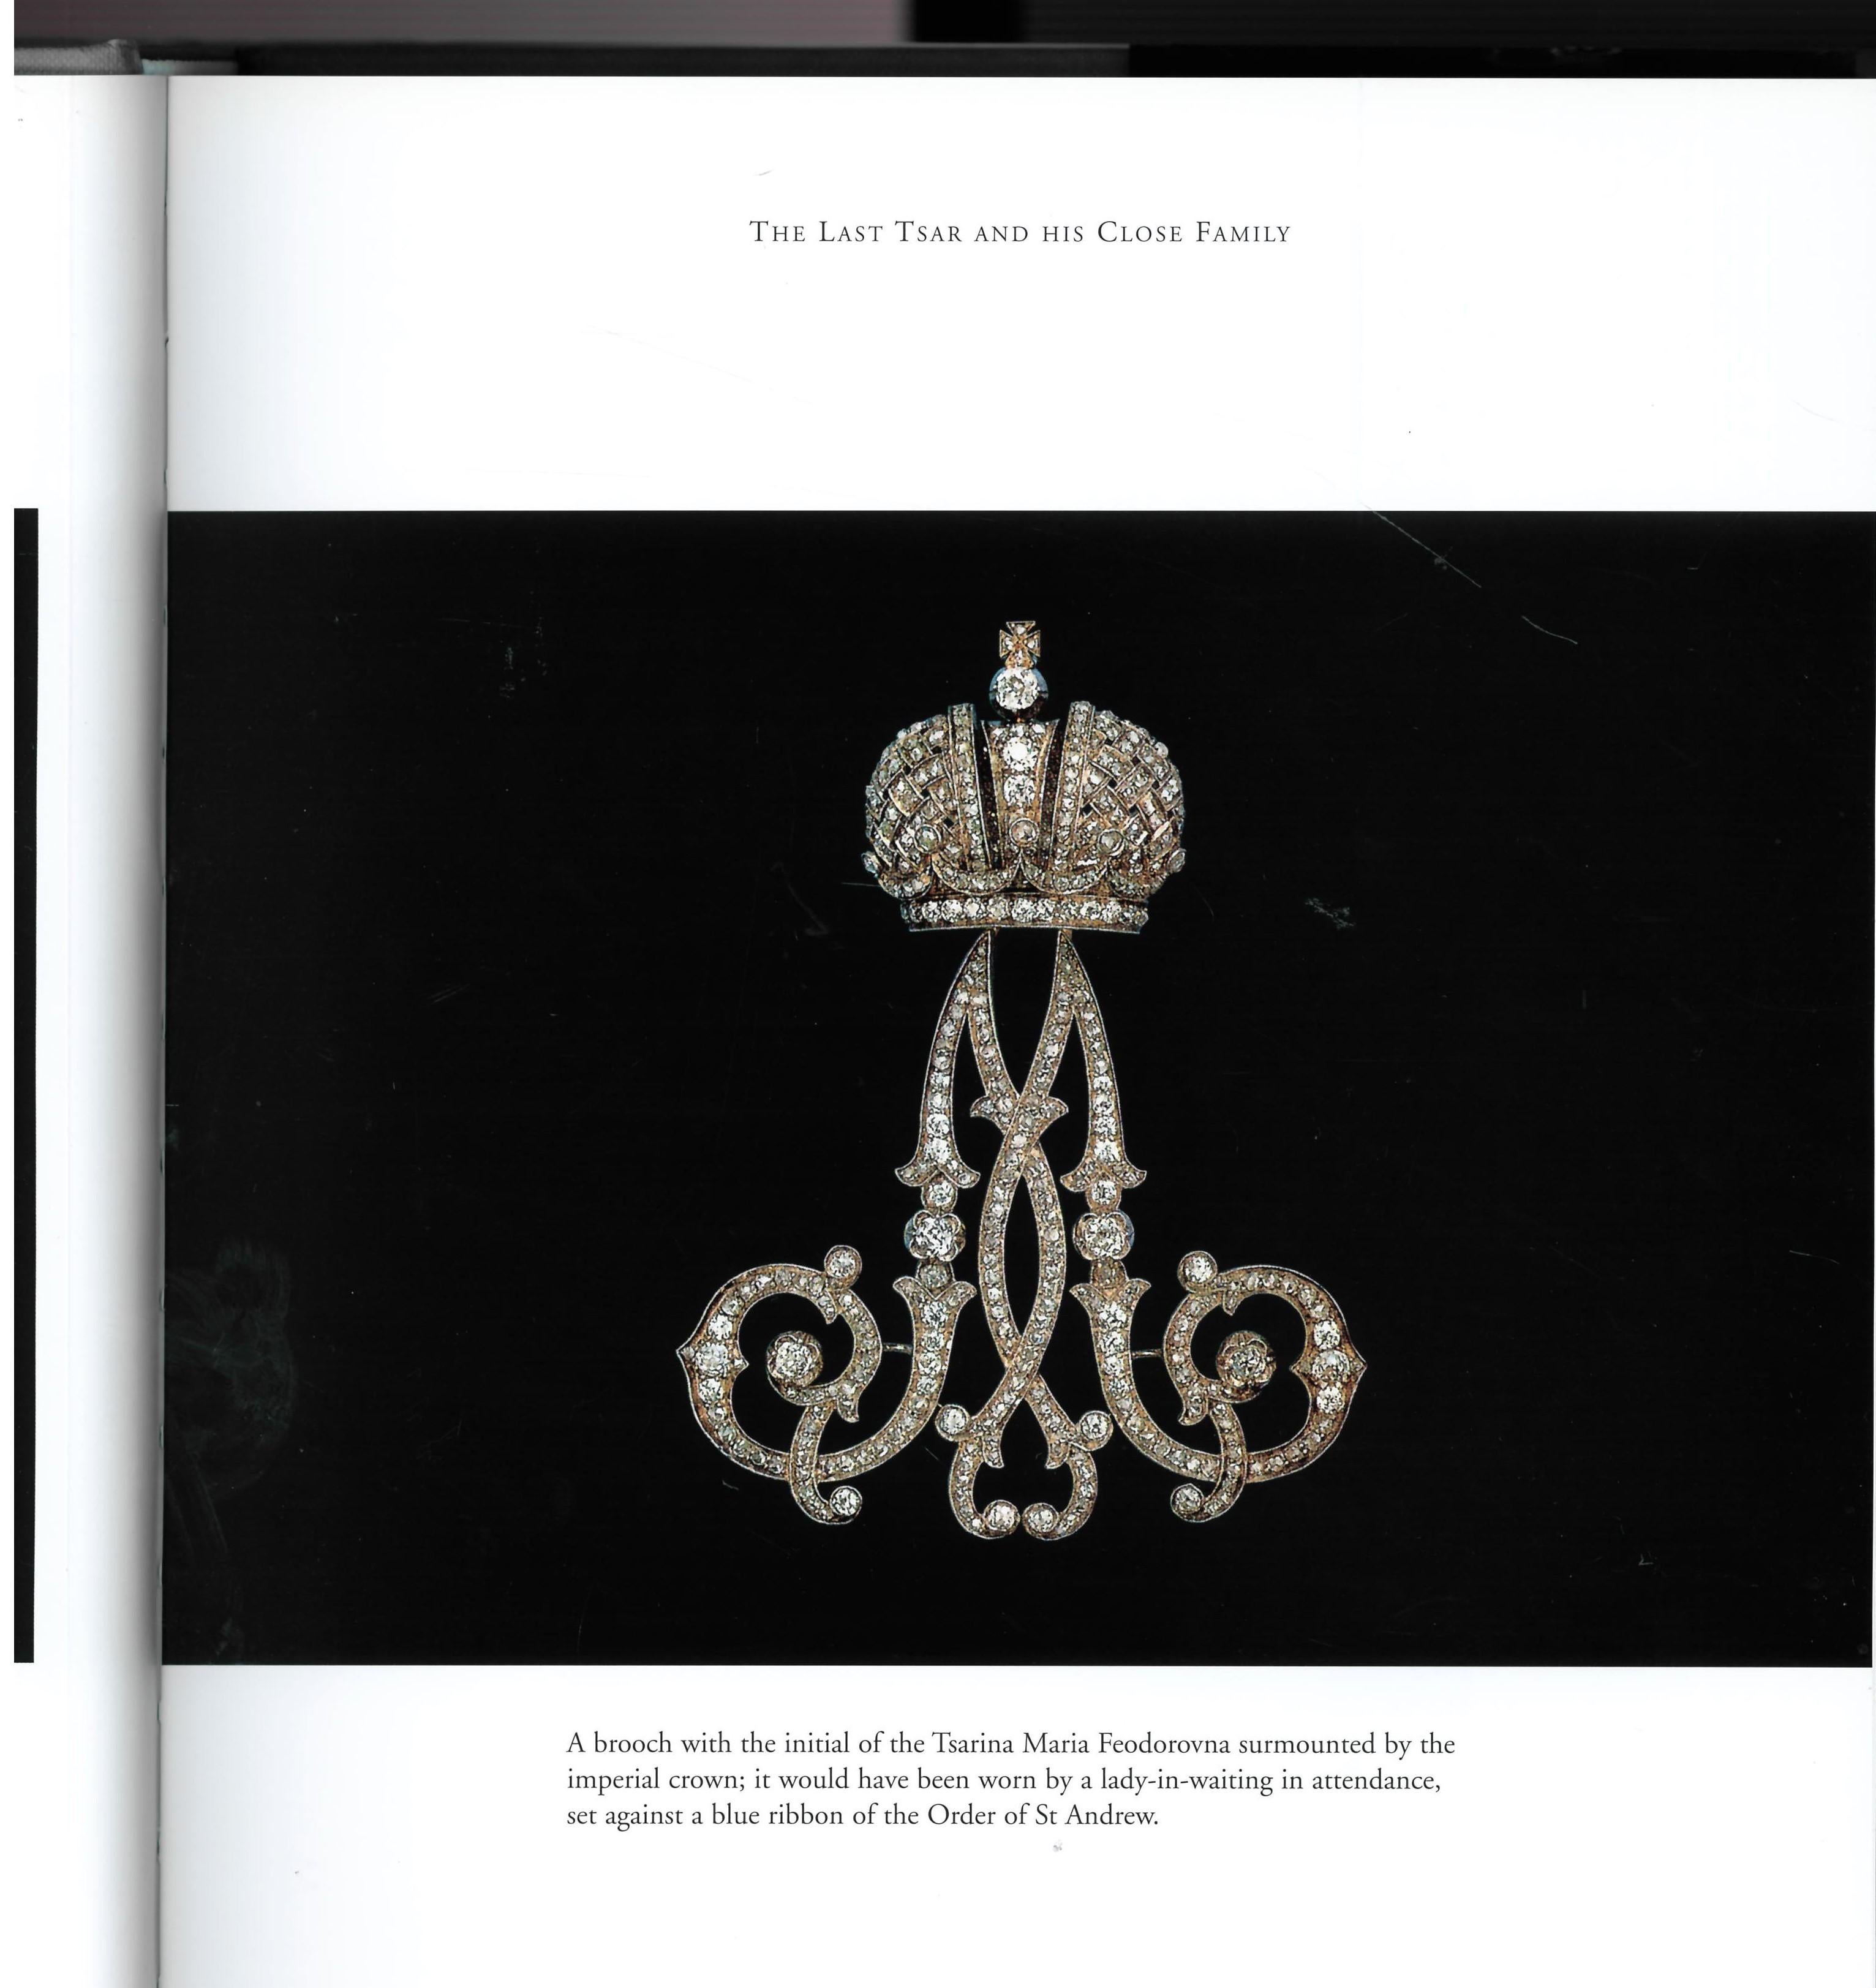 This book surveys one of the worlds most important collections of jewellery, that of the Imperial Romanov family, rulers of Russia for more than three centuries. Through his work at Sothebys and Christies and his own extensive research, the author